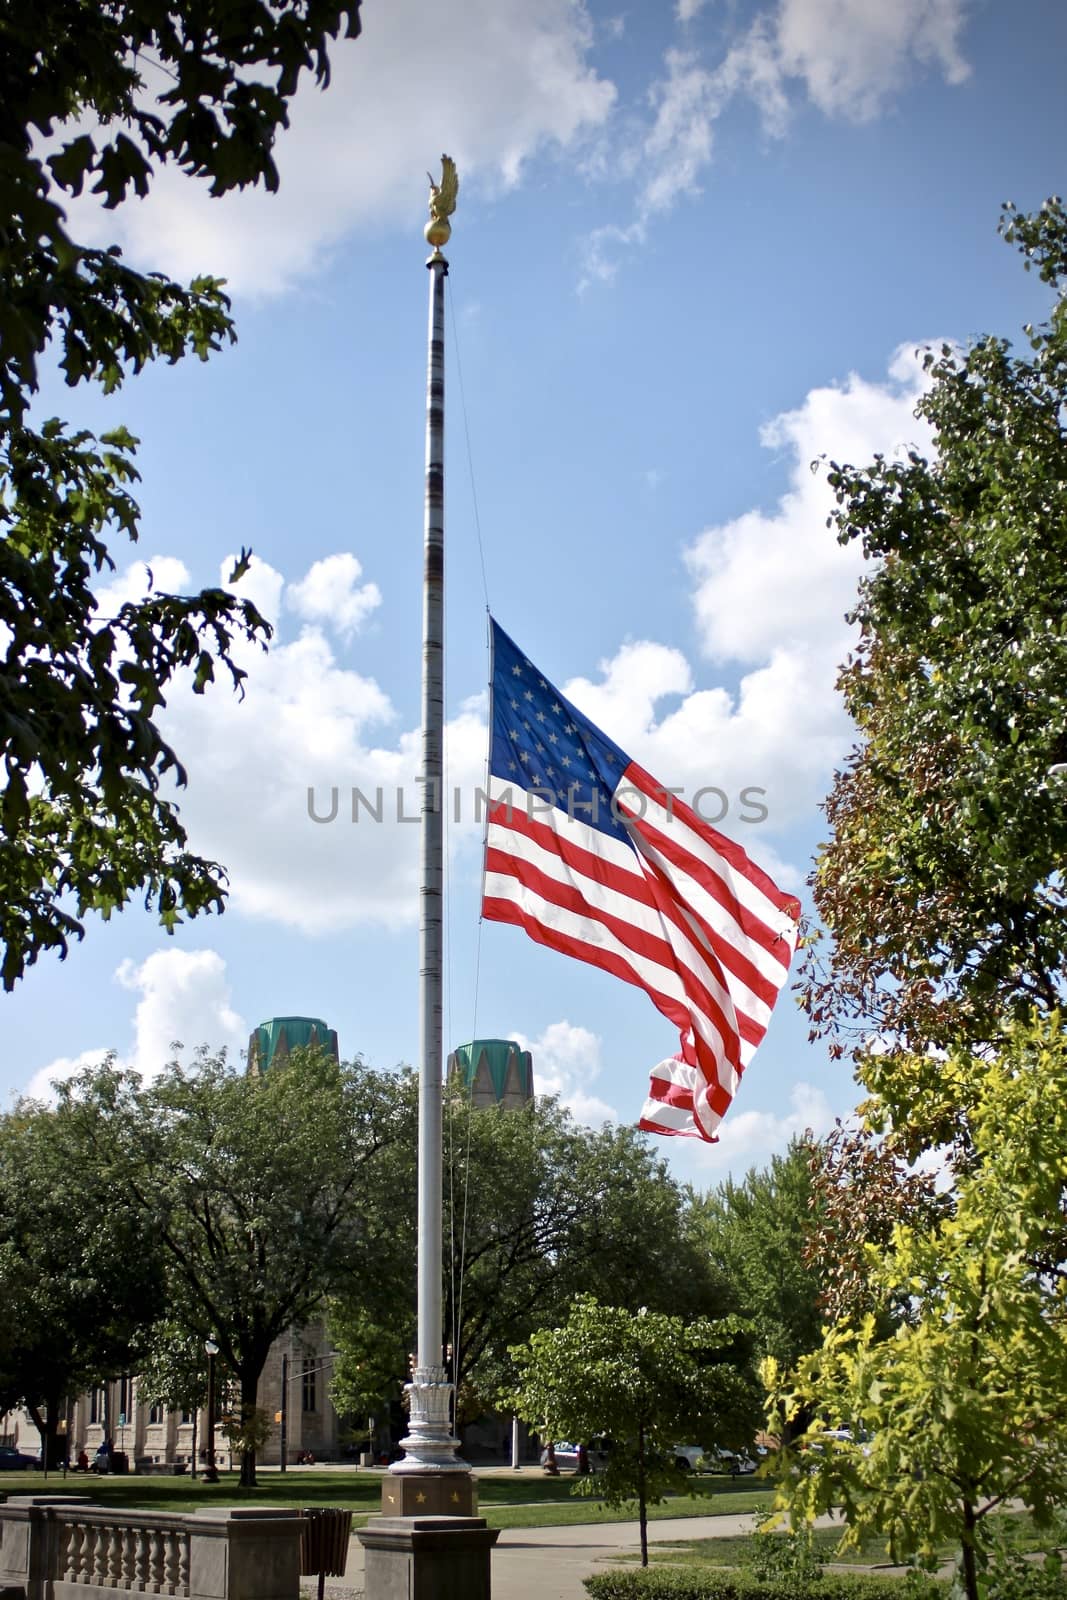 American flags at half-mast - 2 by gerryjustice@justicemarketing.com